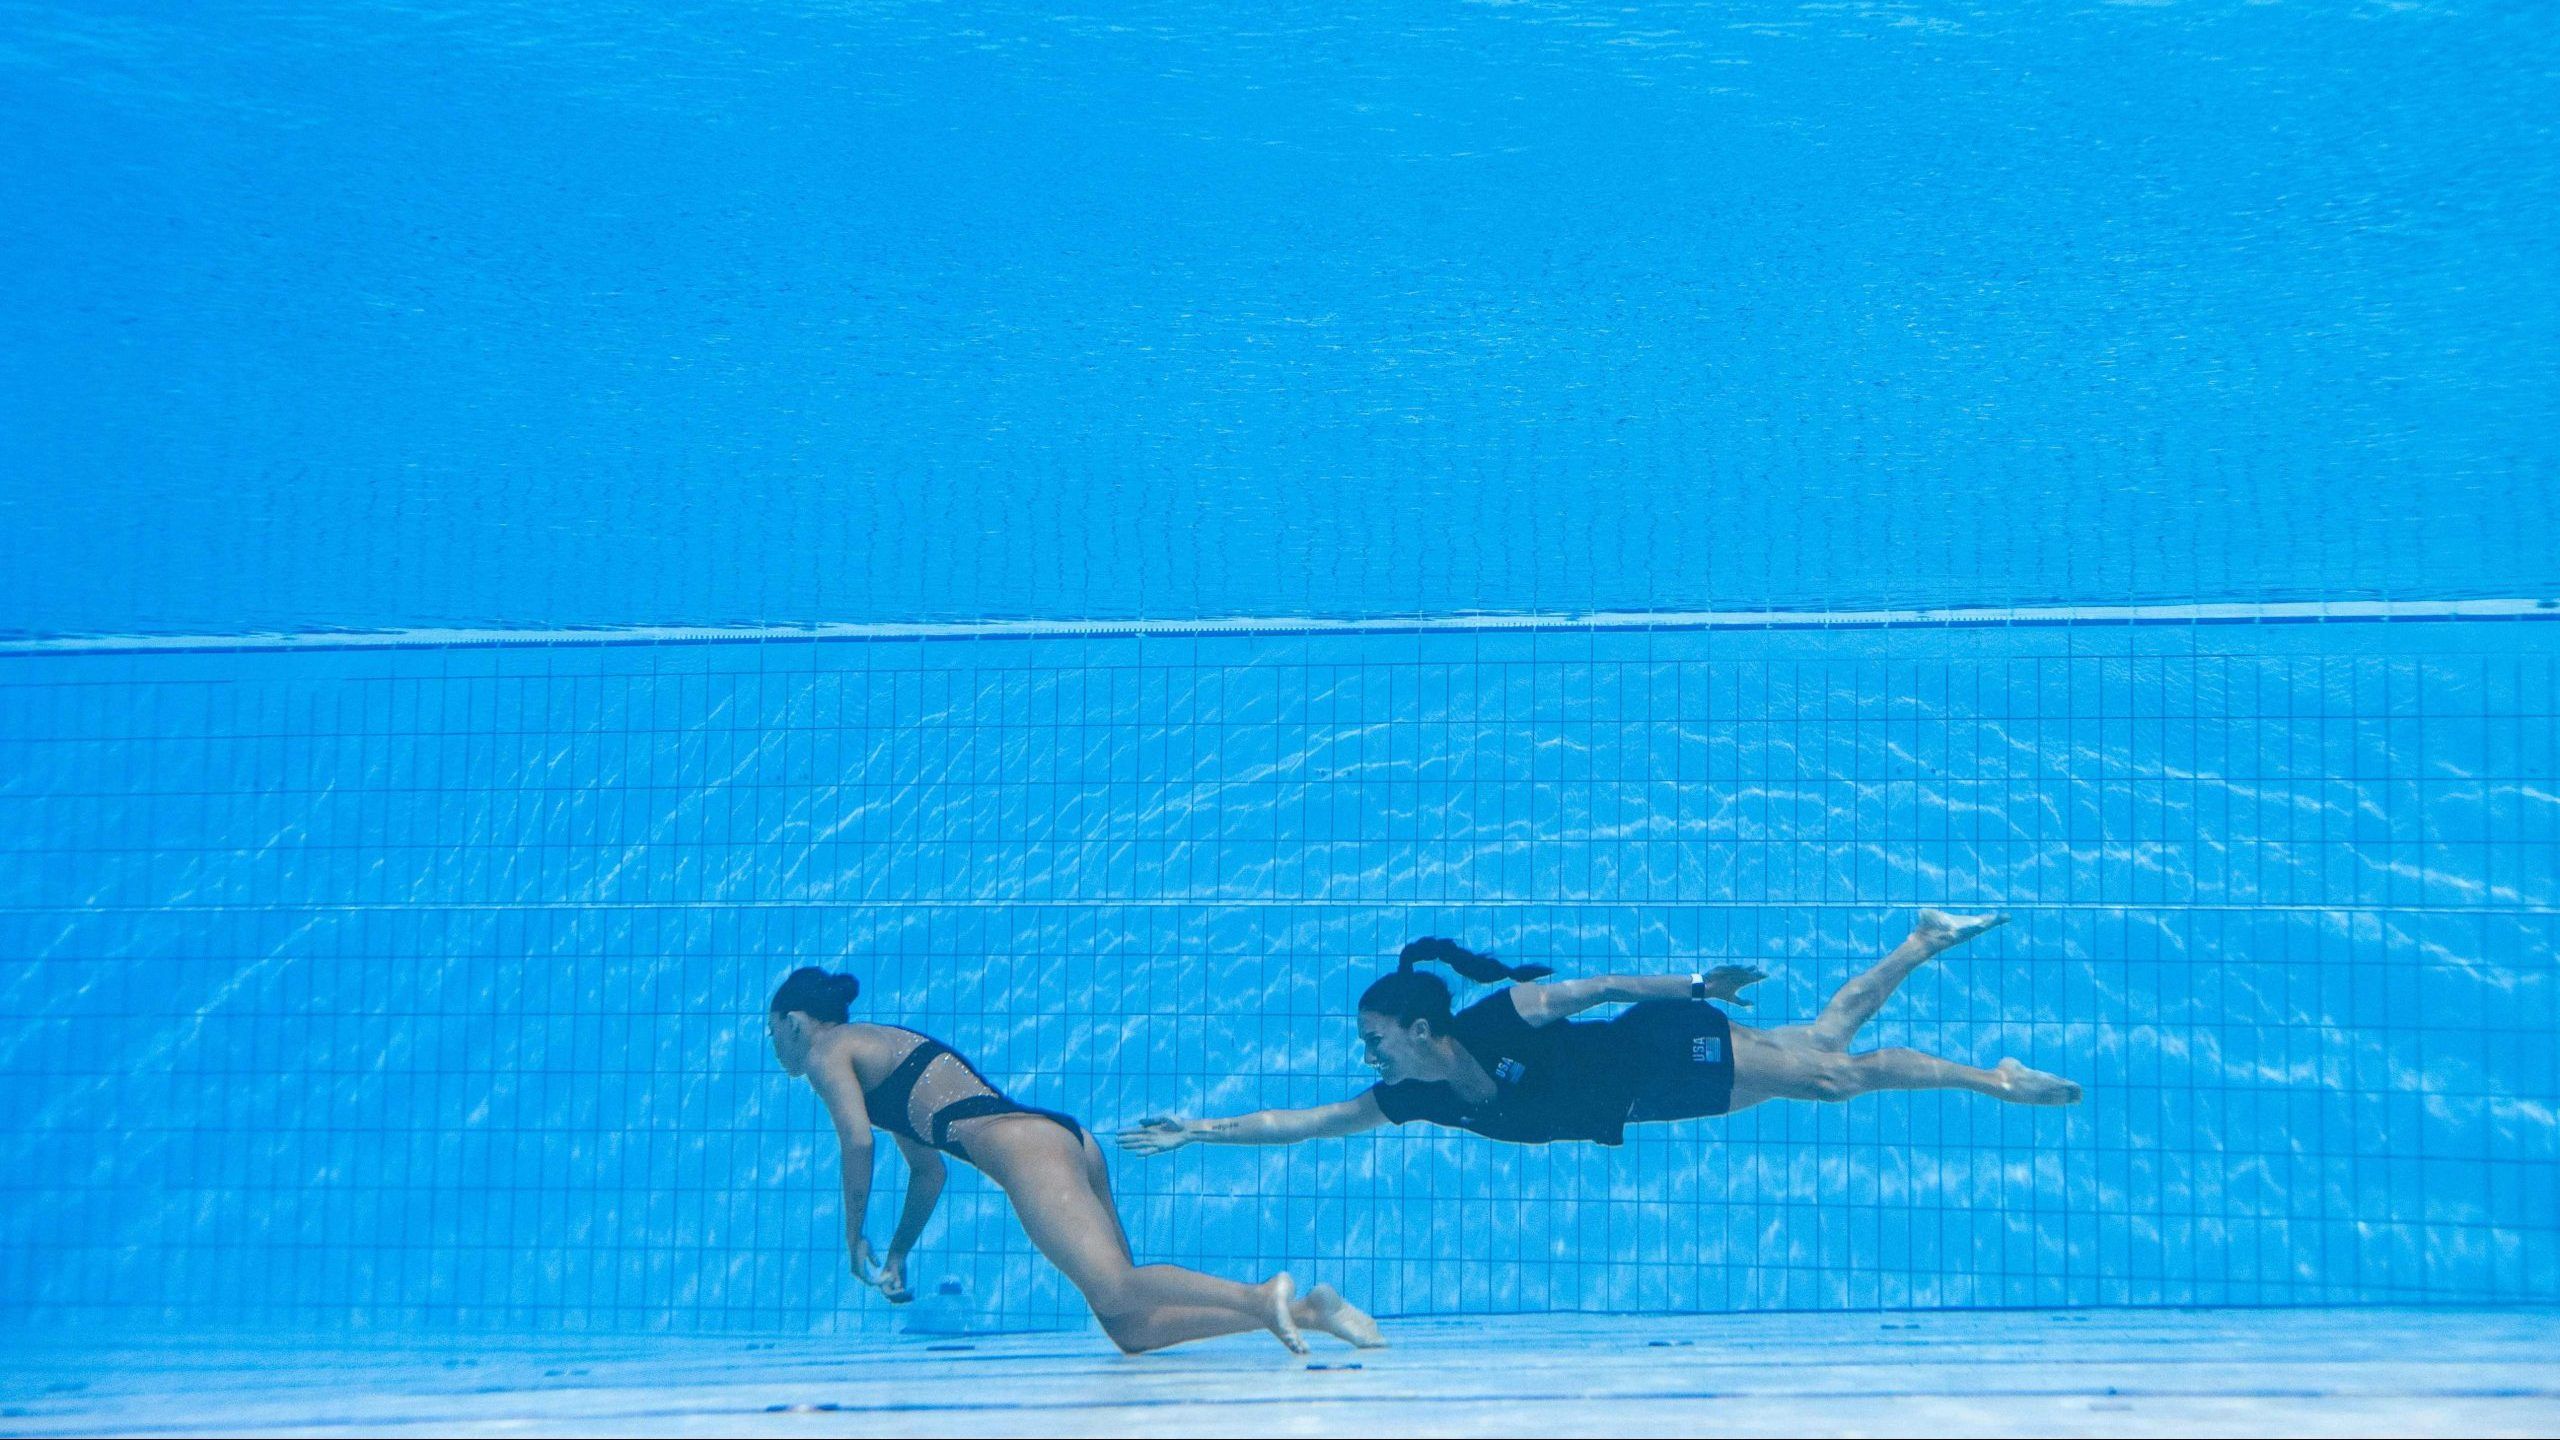 TOPSHOT - A member of Team USA (R) recovers USA's Anita Alvarez (L), from the bottom of the pool during an incendent in the women's solo free artistic swimming finals, during the Budapest 2022 World Aquatics Championships at the Alfred Hajos Swimming Complex in Budapest on June 22, 2022.